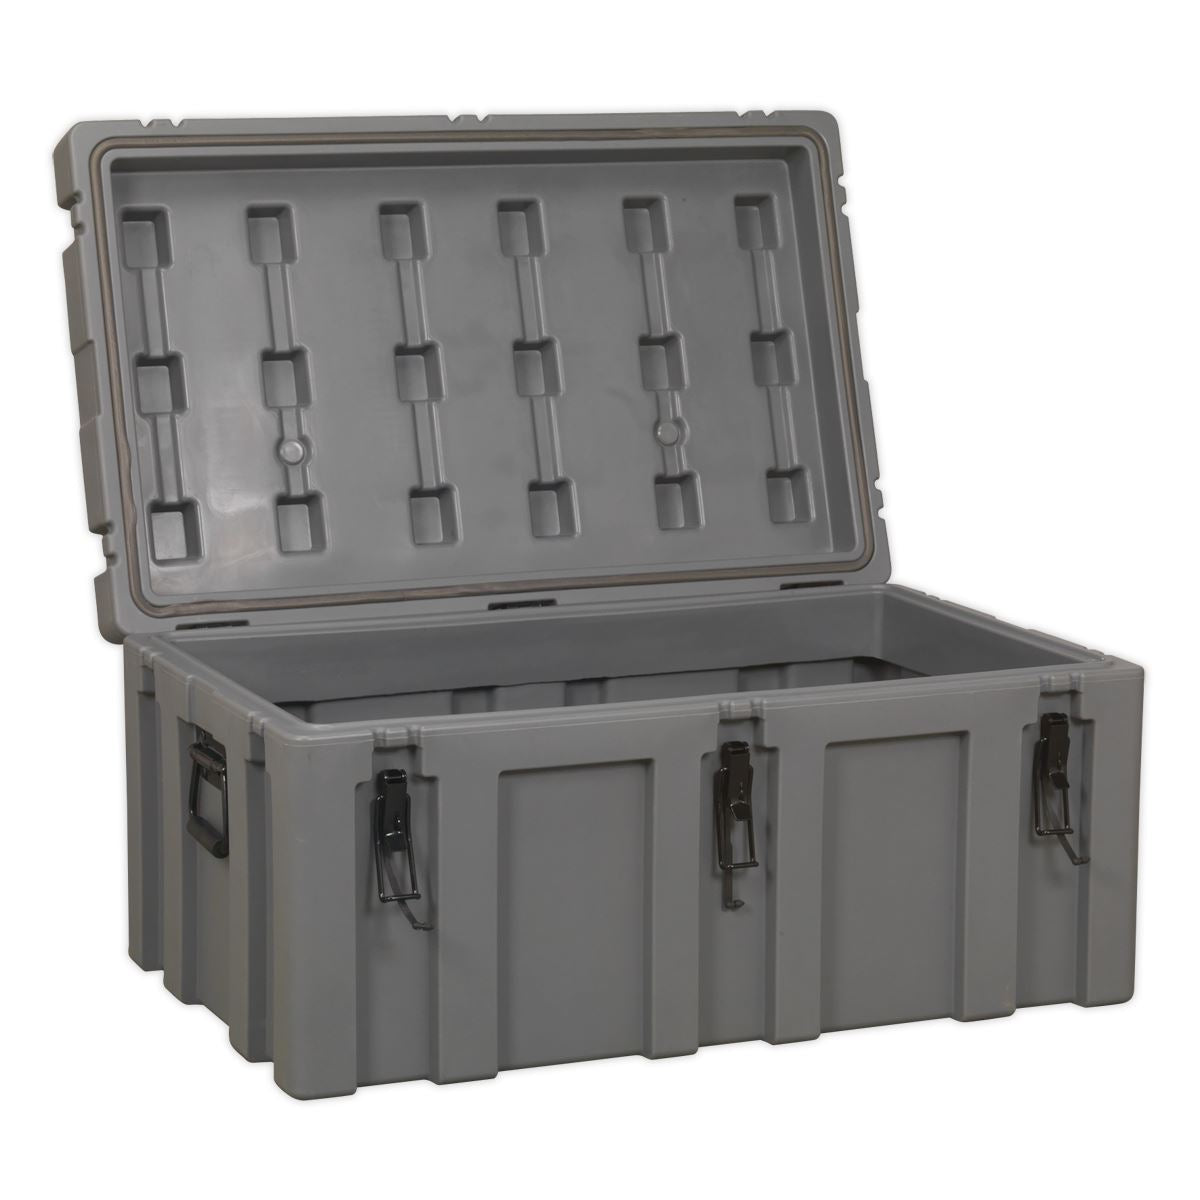 Sealey Rota-Mould Cargo Case 870mm RMC870